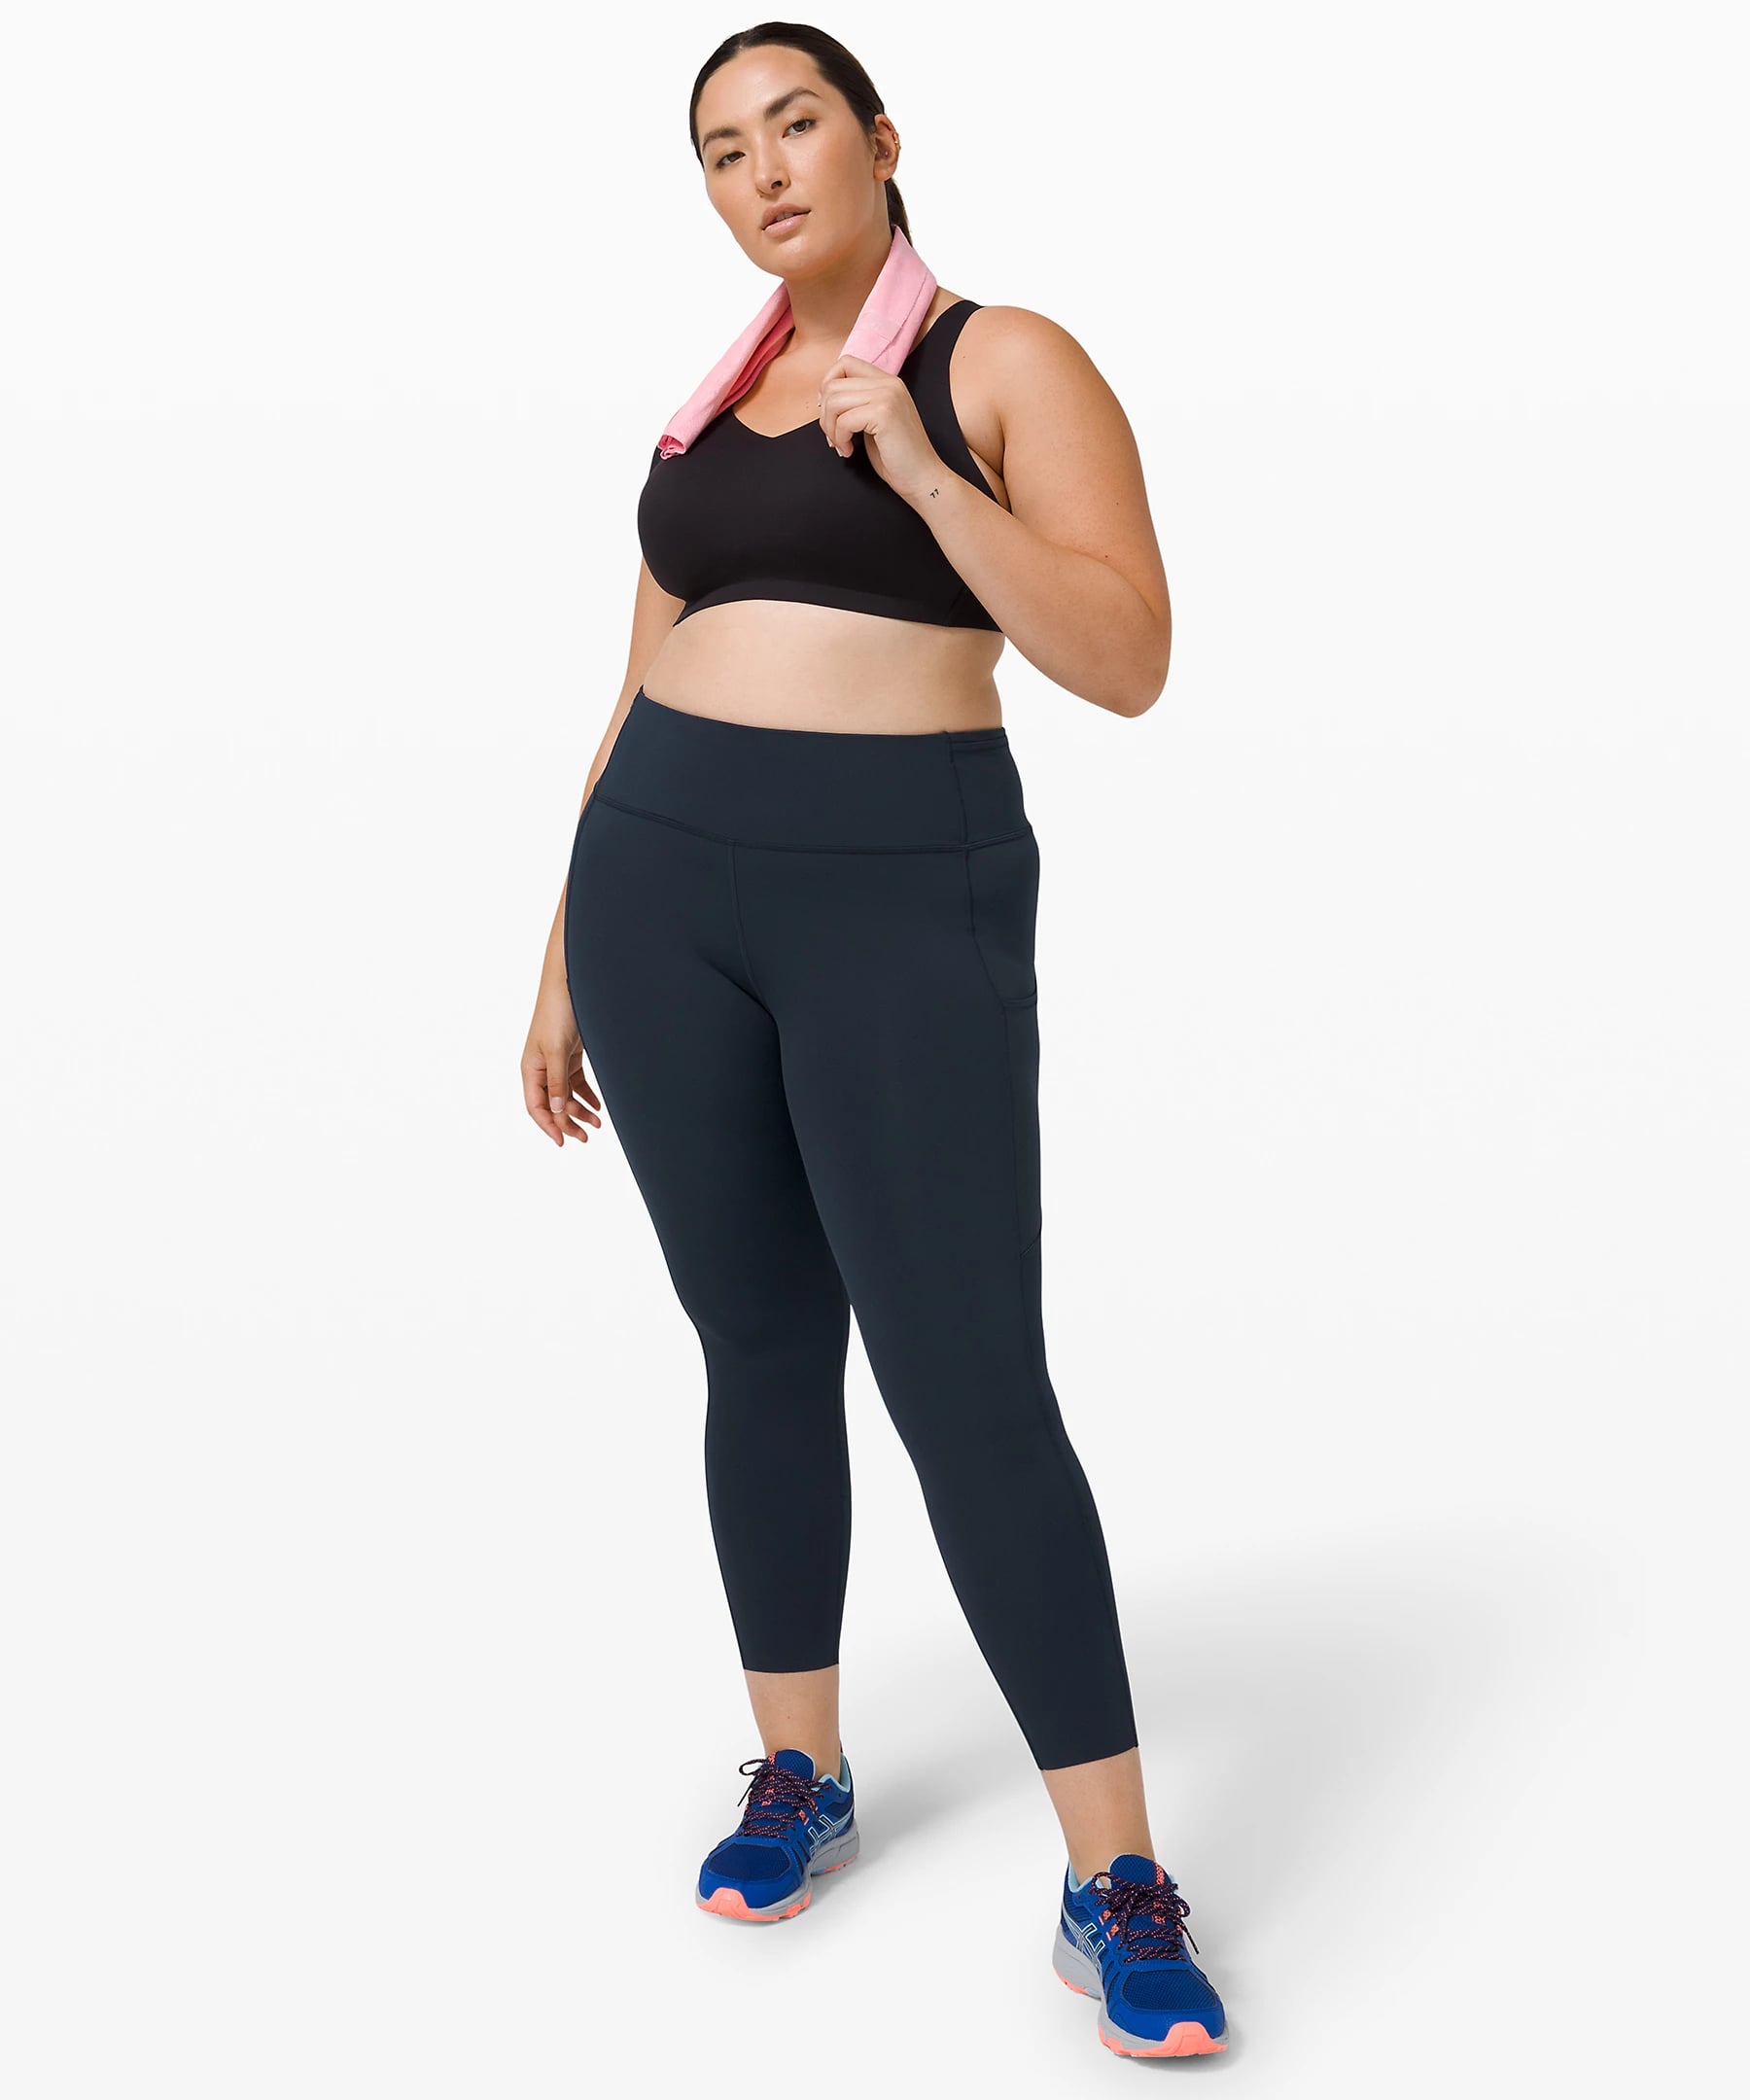 LULULEMON SIZE 6 Ladies EXERCISE – One More Time Family